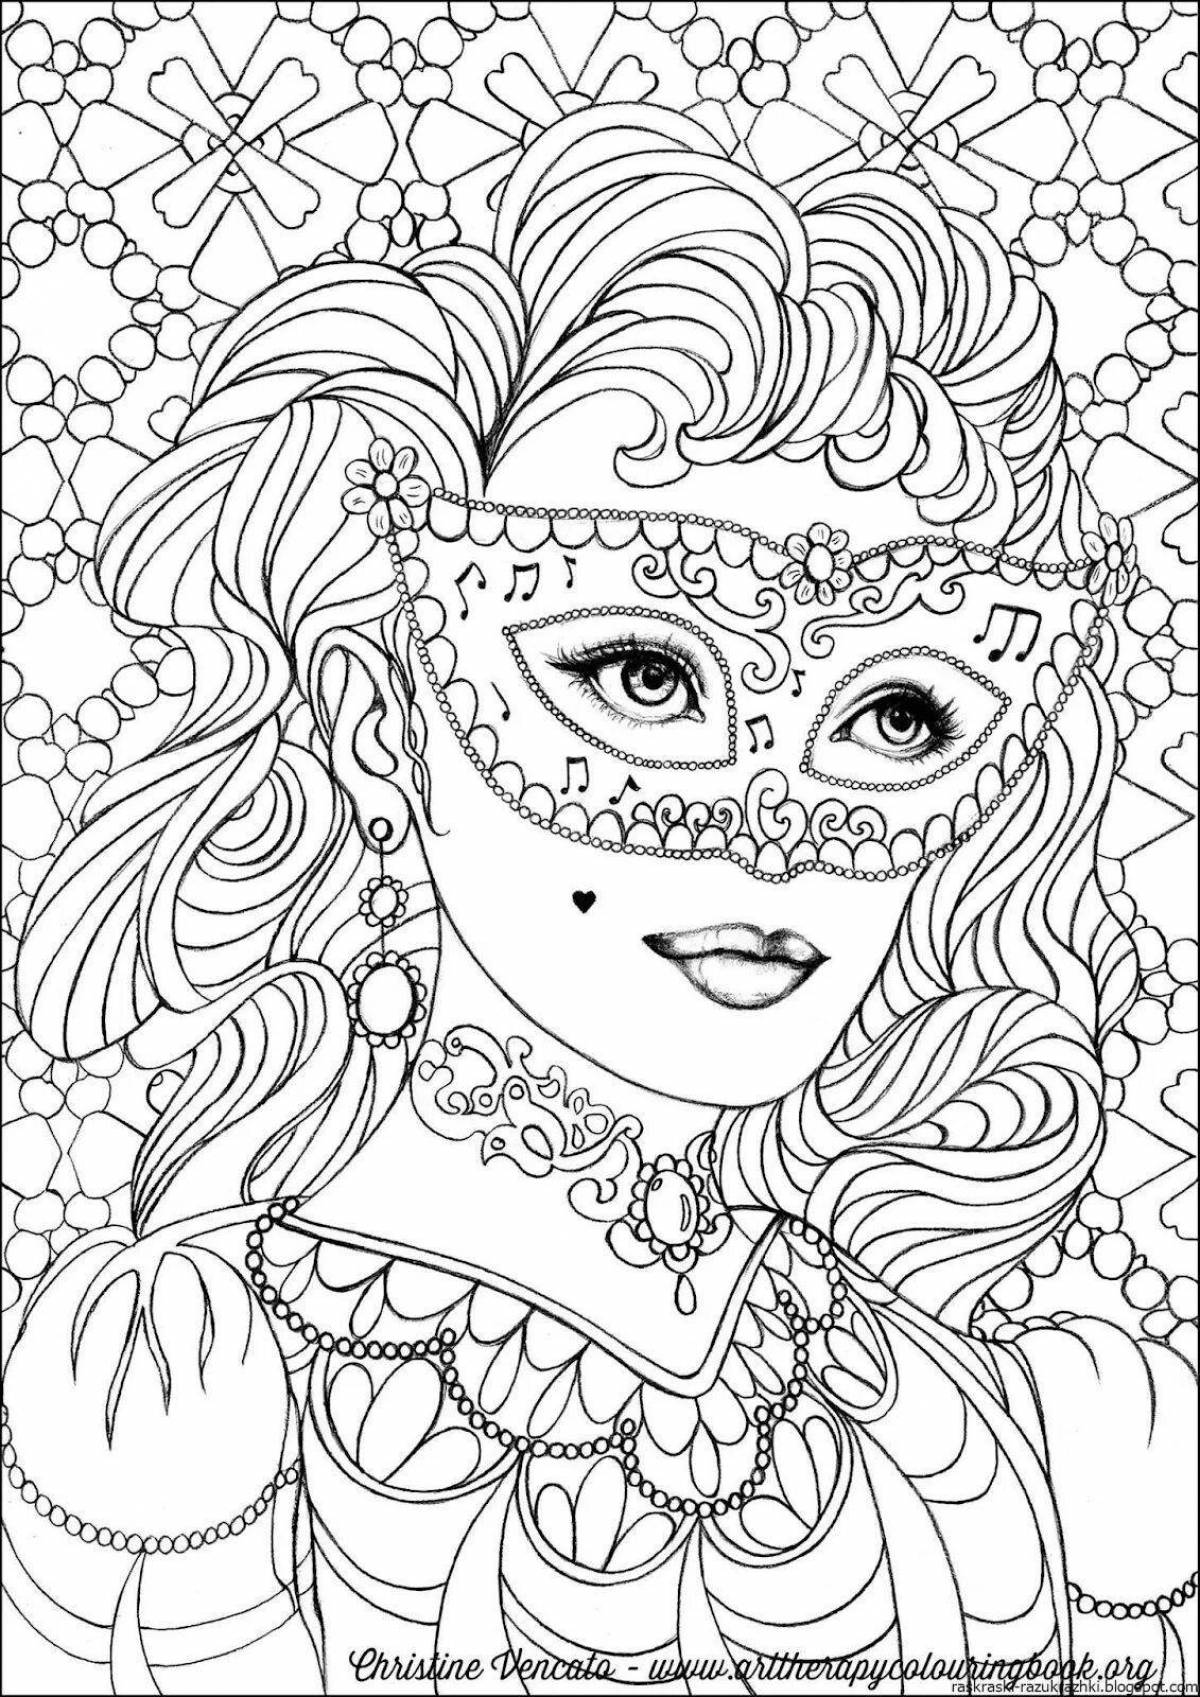 A fascinating anti-stress coloring book for children aged 7-8